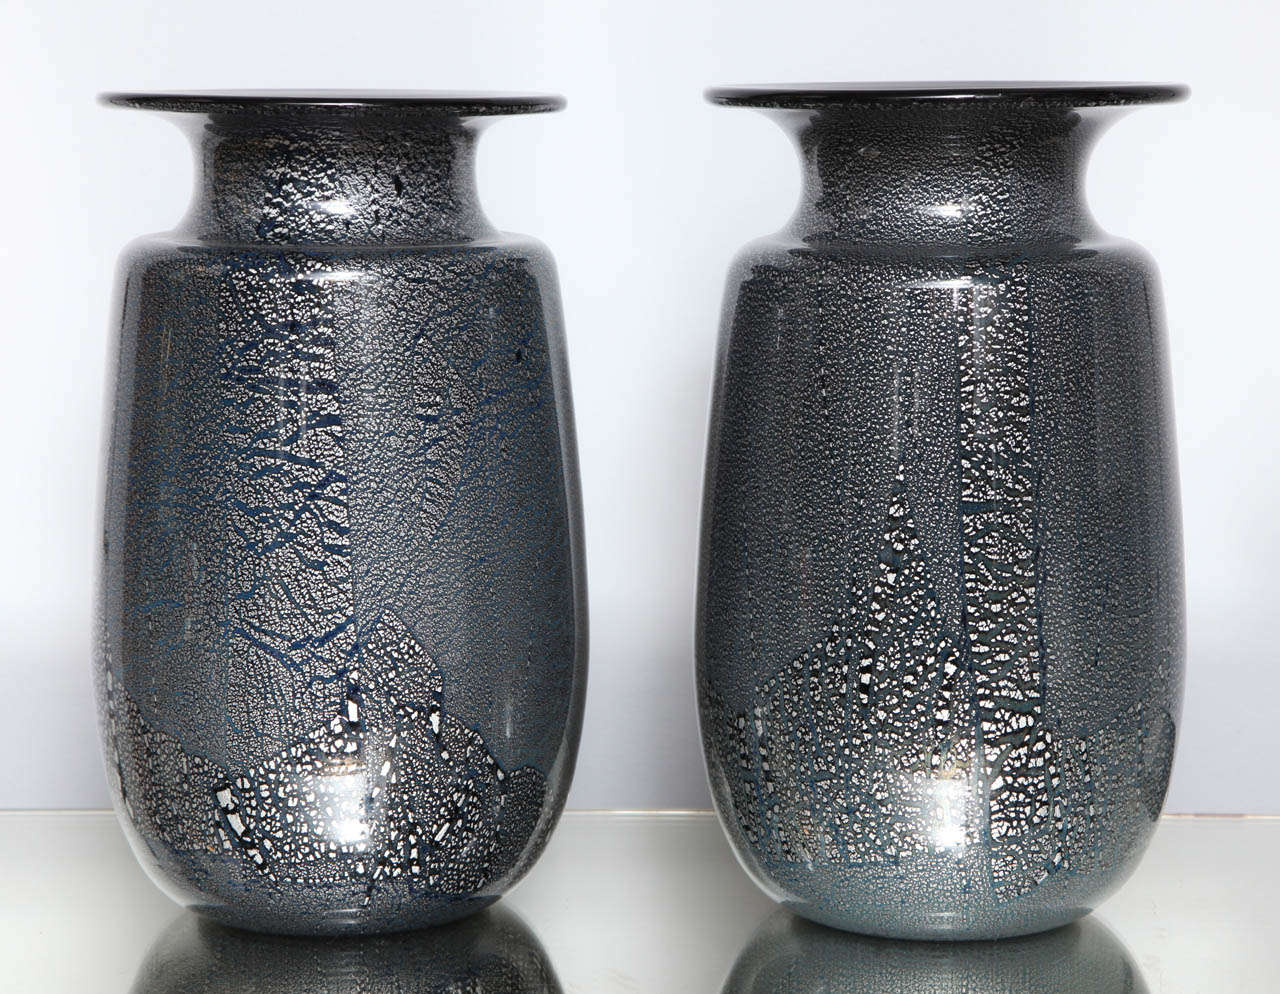 A beautiful pair of Murano glass vases attributed to Seguso Vetri d'Arte with cased silver leaf in clear glass over 'black' glass.